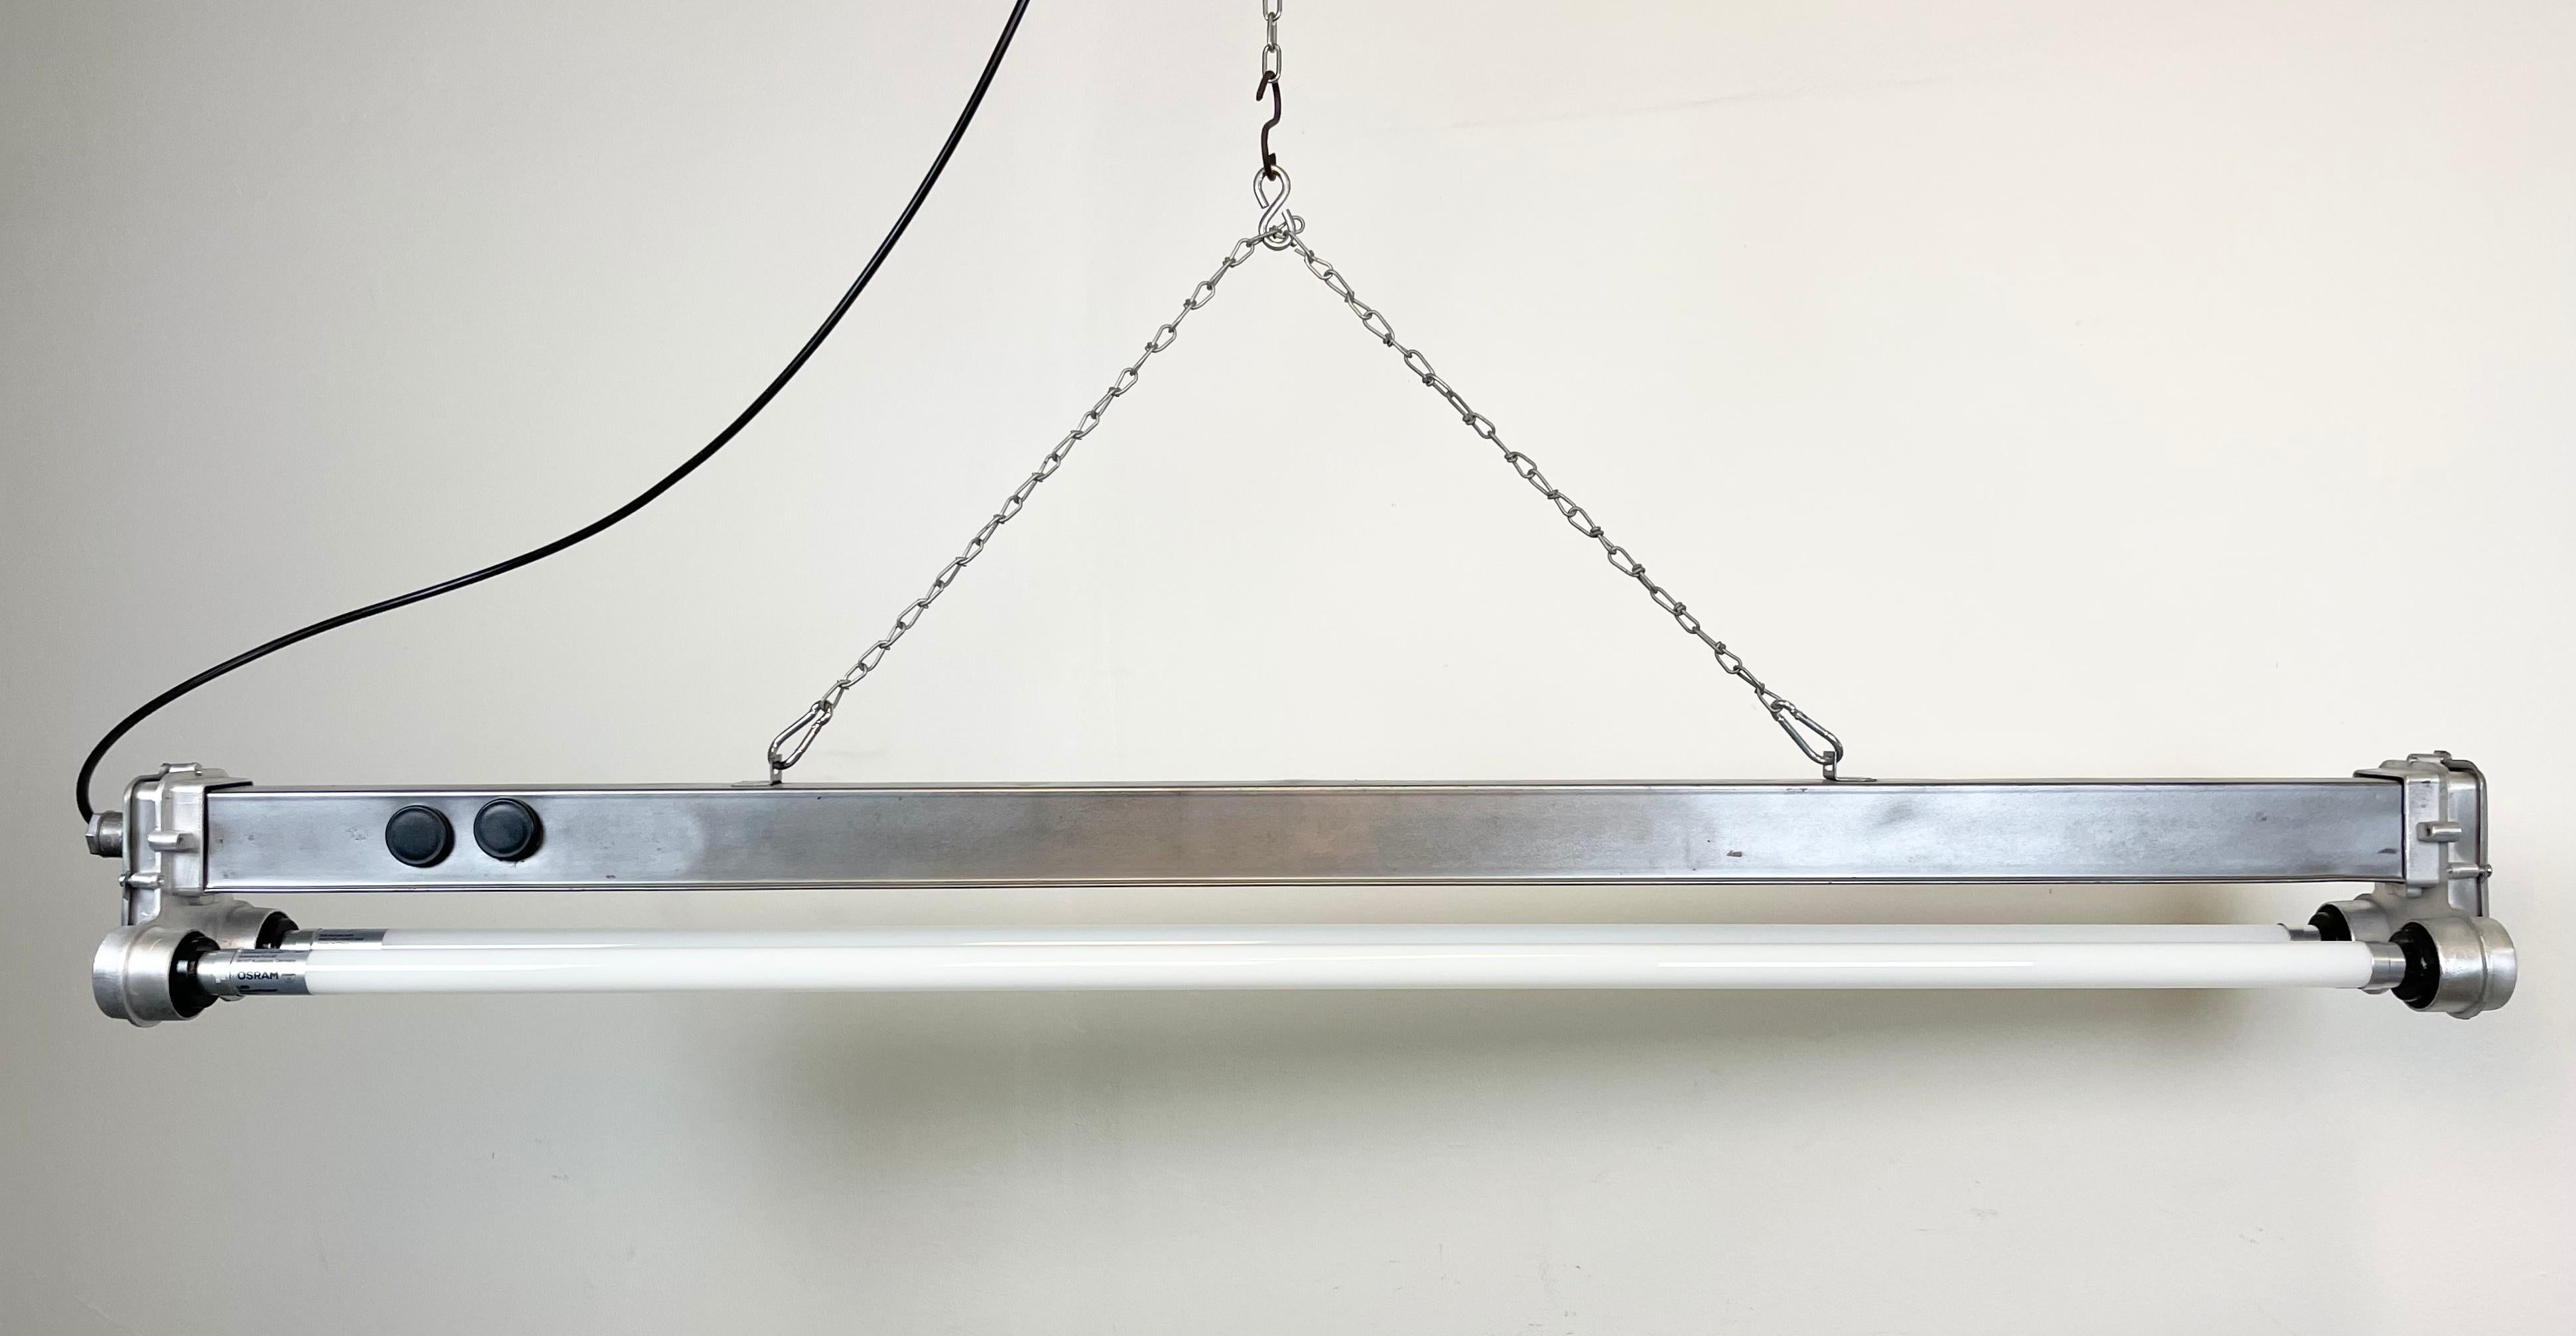 This industrial metal fluorescent light was made by Polam Wilkasy during the 1970s in Poland. These fixtures were used in laboratories and chemical and industrial plants. The light is converted into two led T8, 120 cm fluorescent tubes. The weight